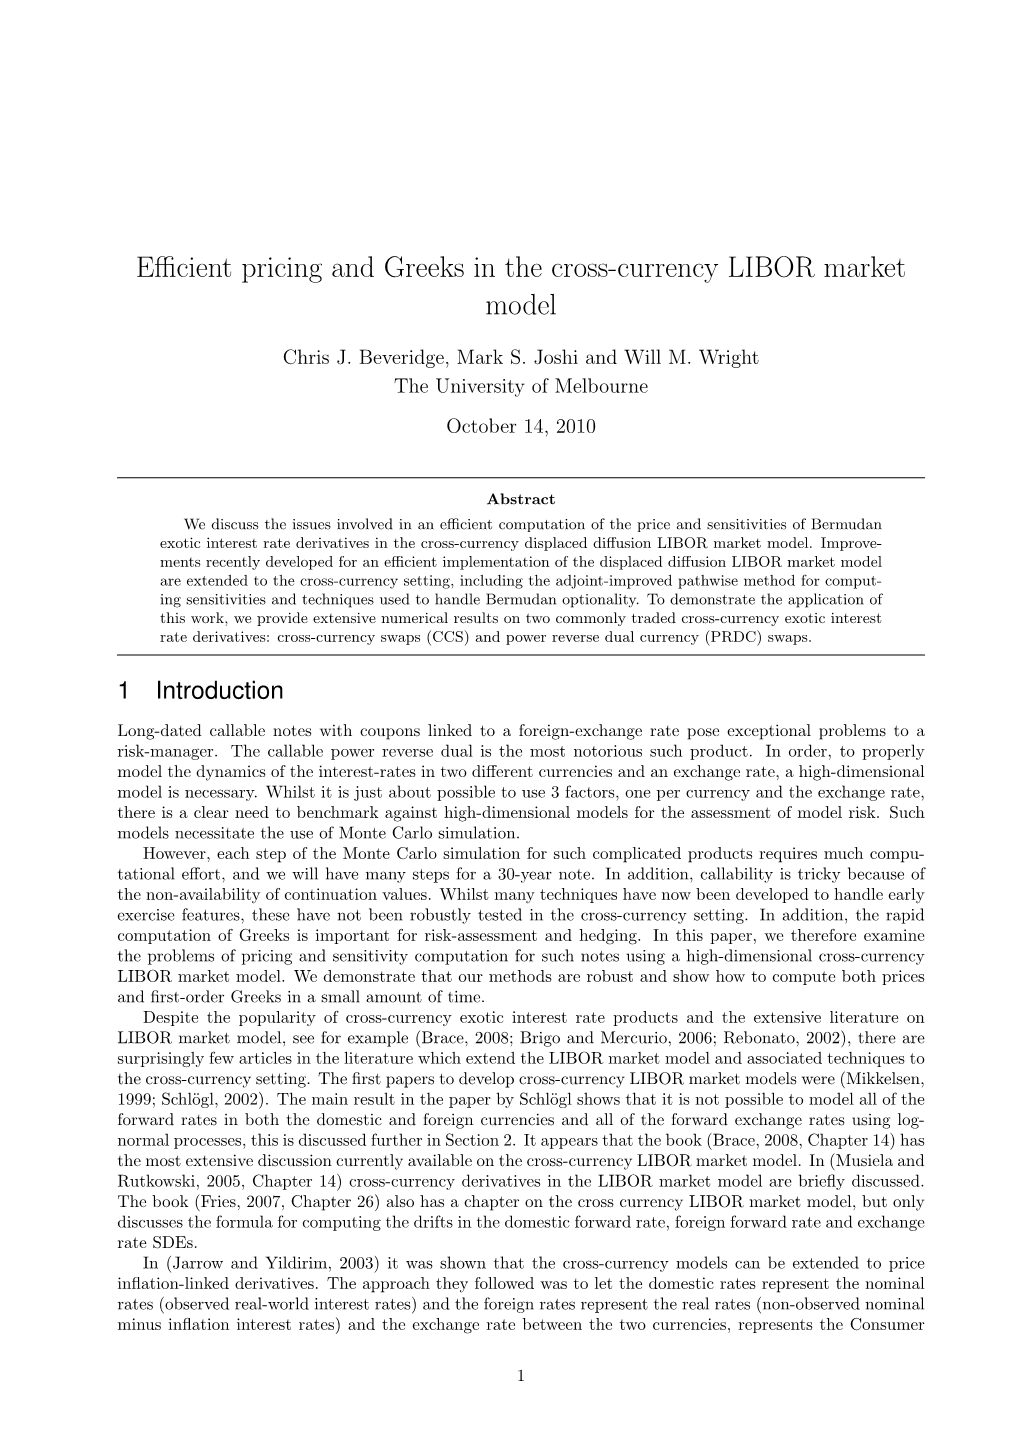 Efficient Pricing and Greeks in the Cross-Currency LIBOR Market Model